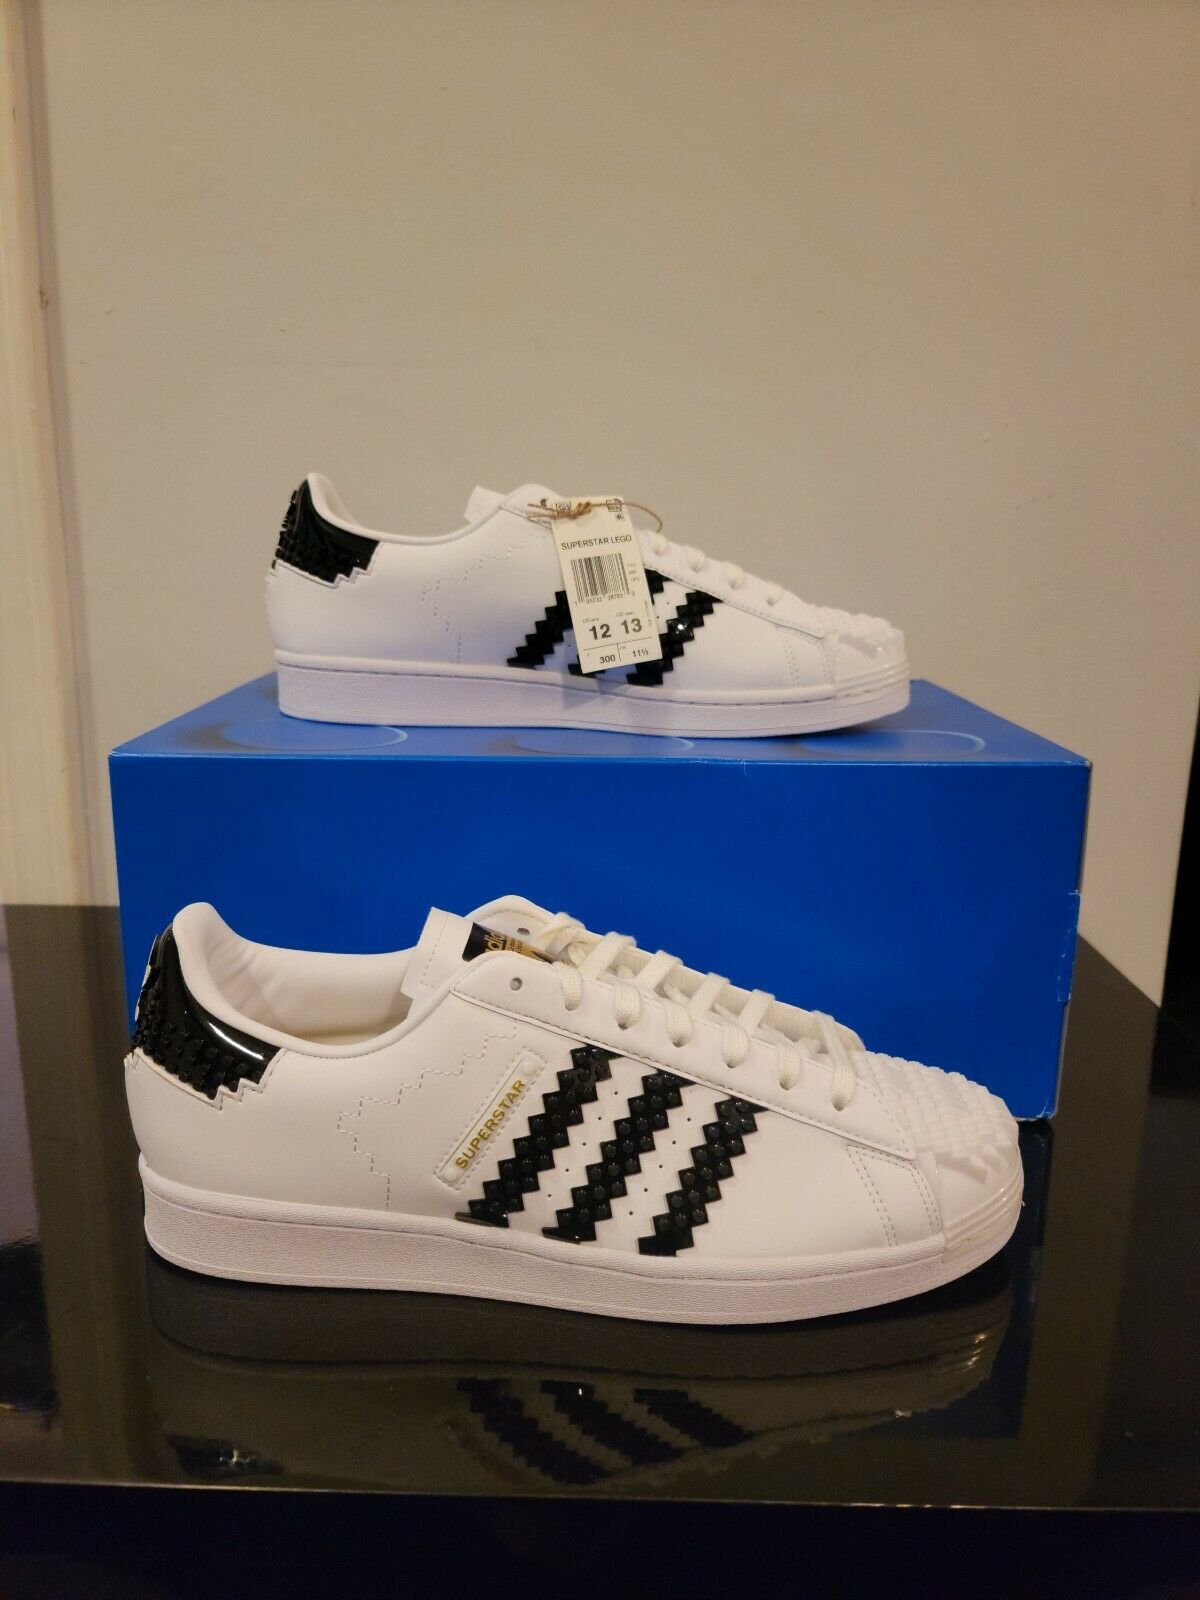 Adidas Superstar Lego Shoes Size 12 new in box